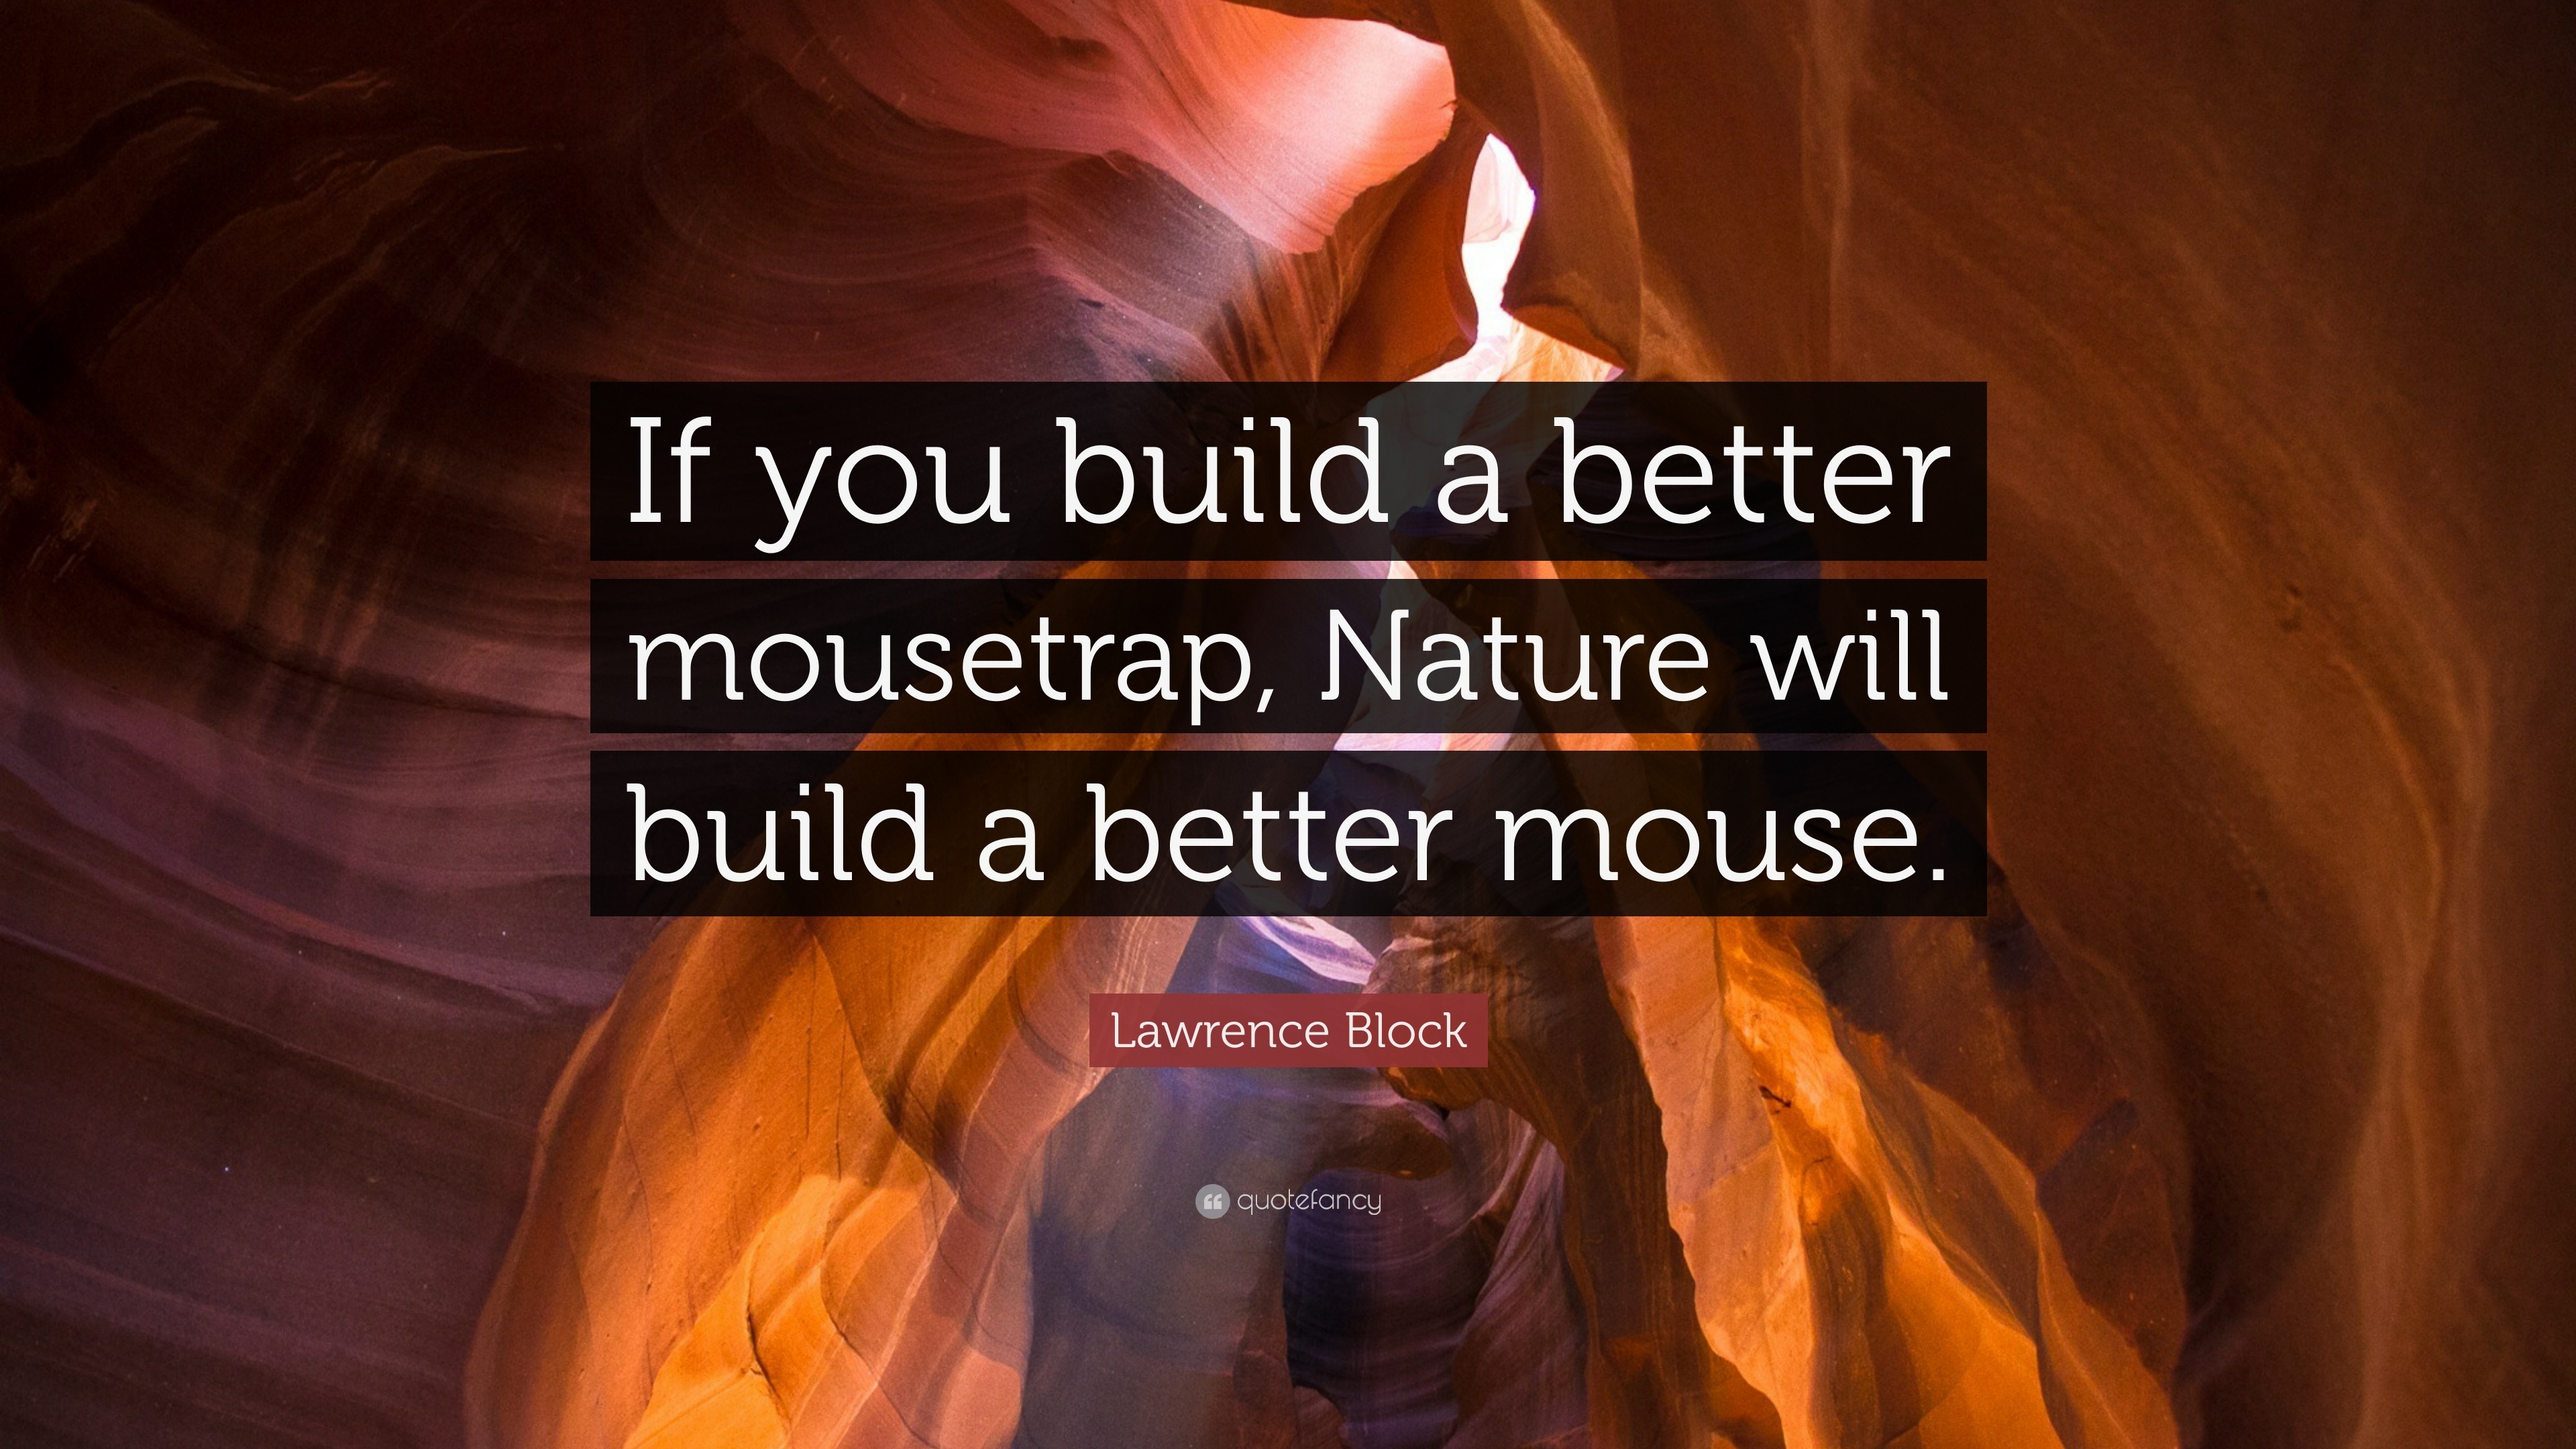 Lawrence Block Quote: “If you build a better mousetrap, Nature will build a  better mouse.”